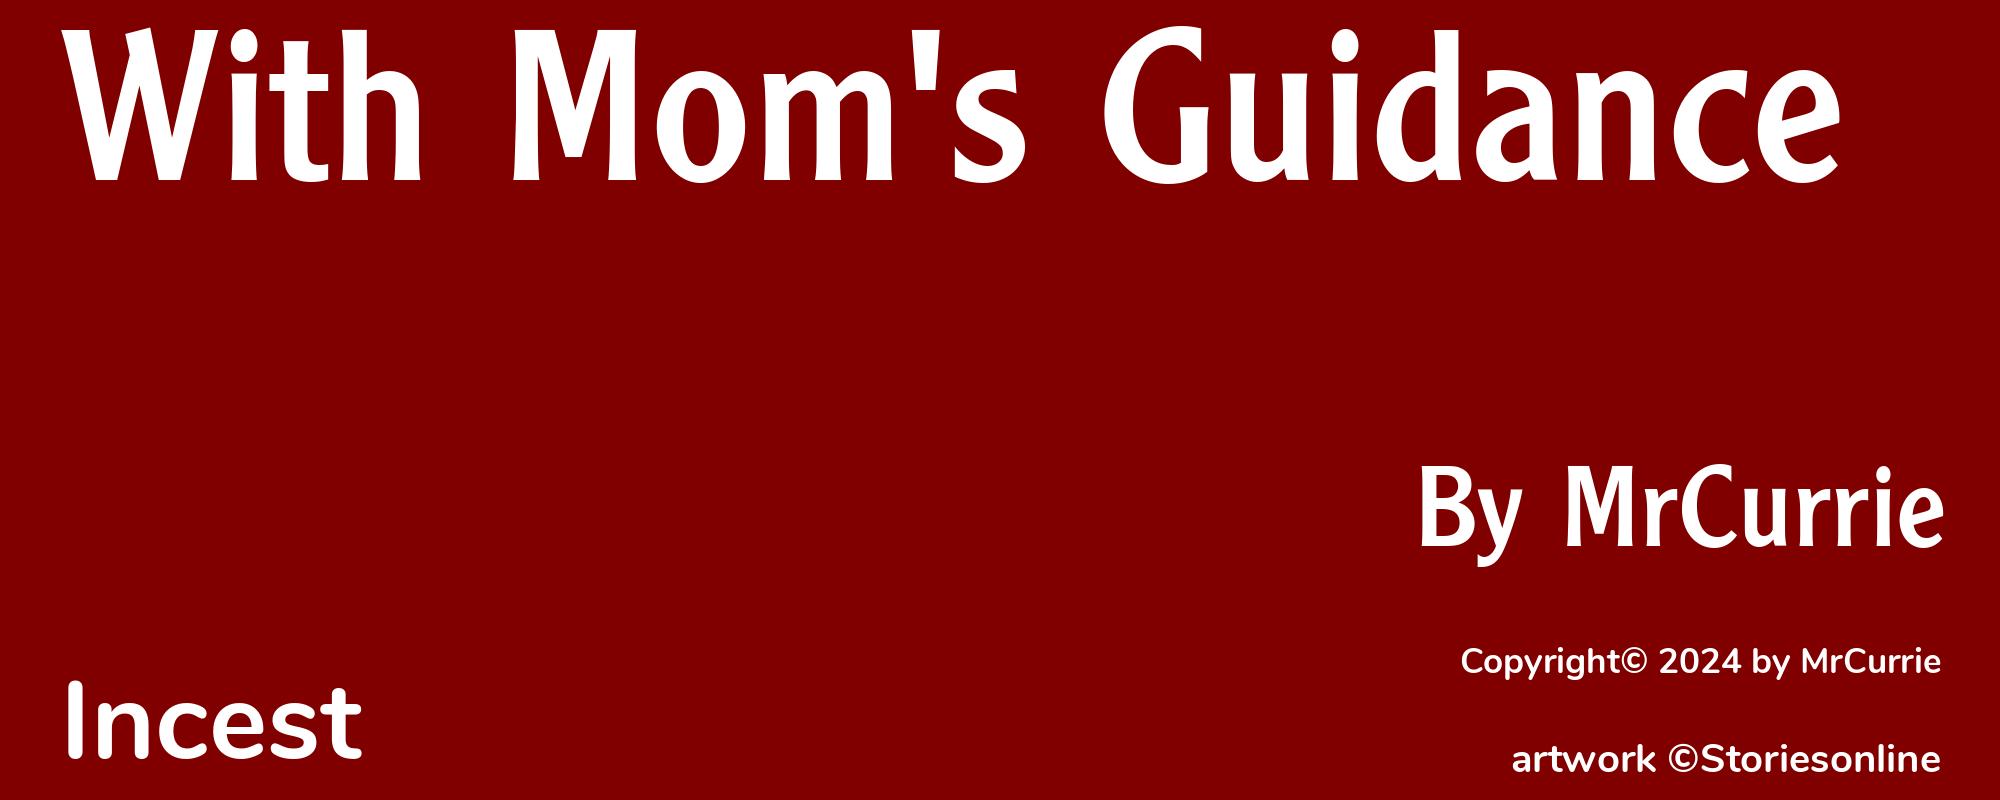 With Mom's Guidance - Cover